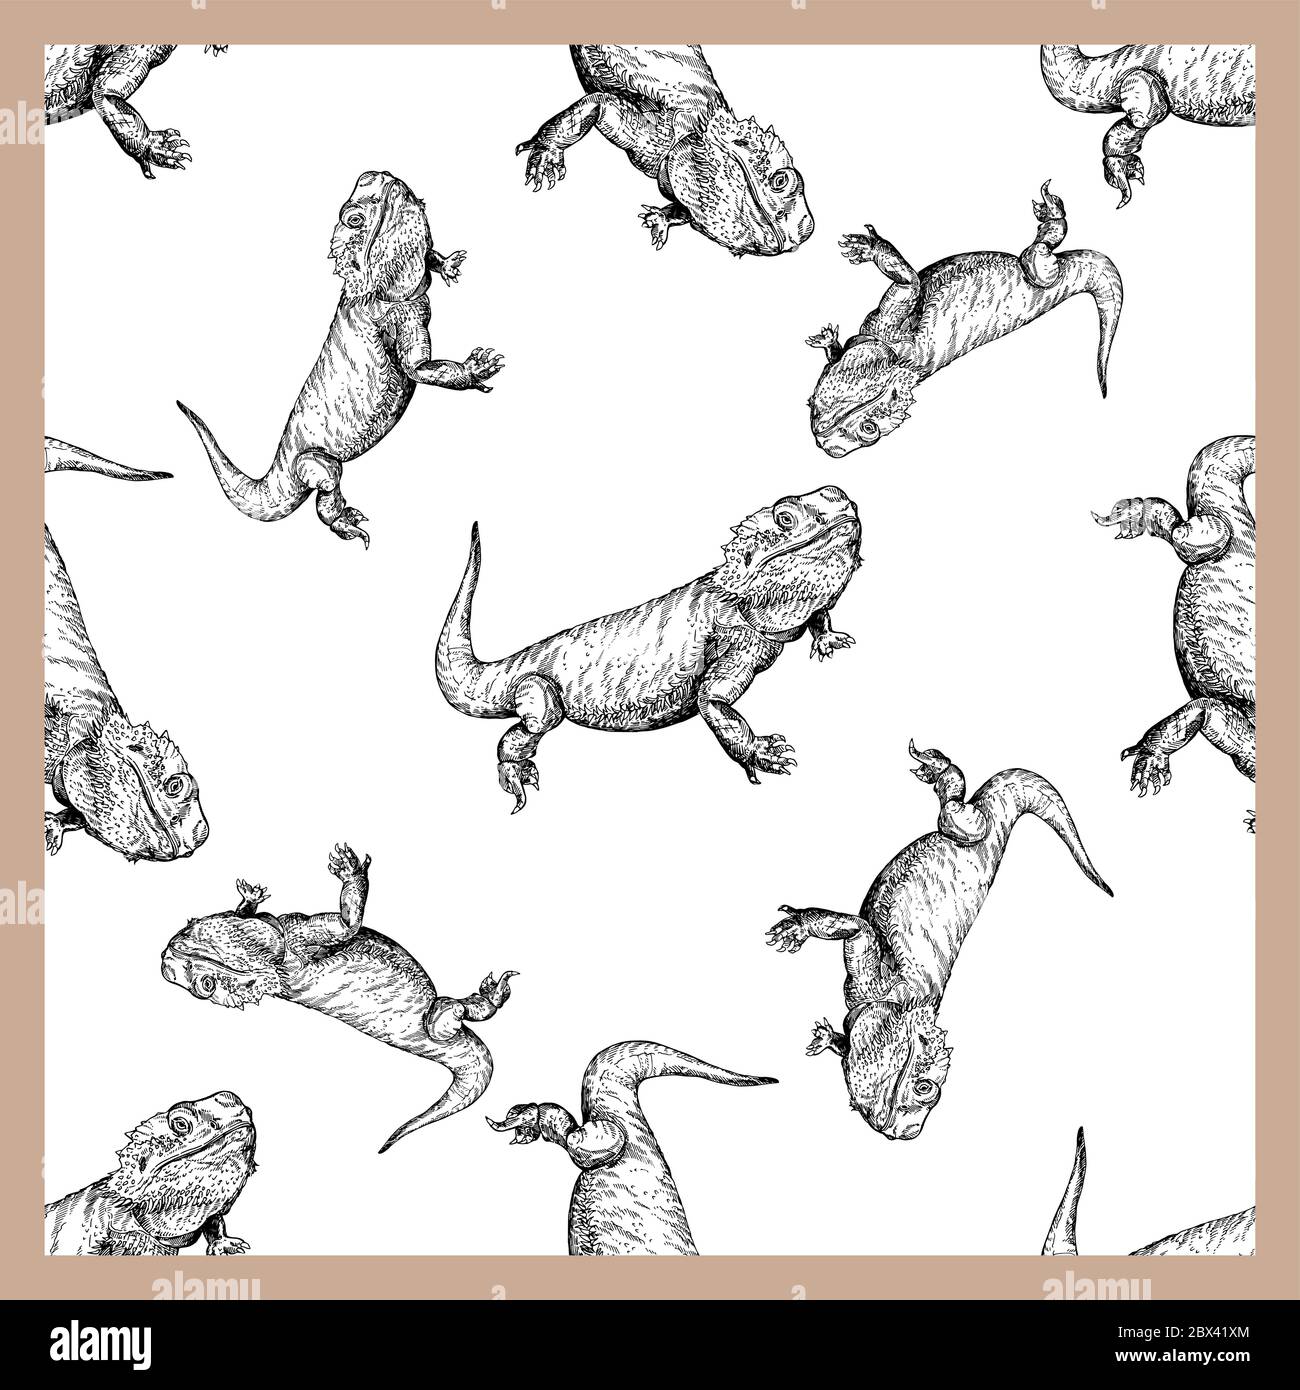 Seamless pattern of hand drawn sketch style bearded dragons isolated on white background. Vector illustration. Stock Vector